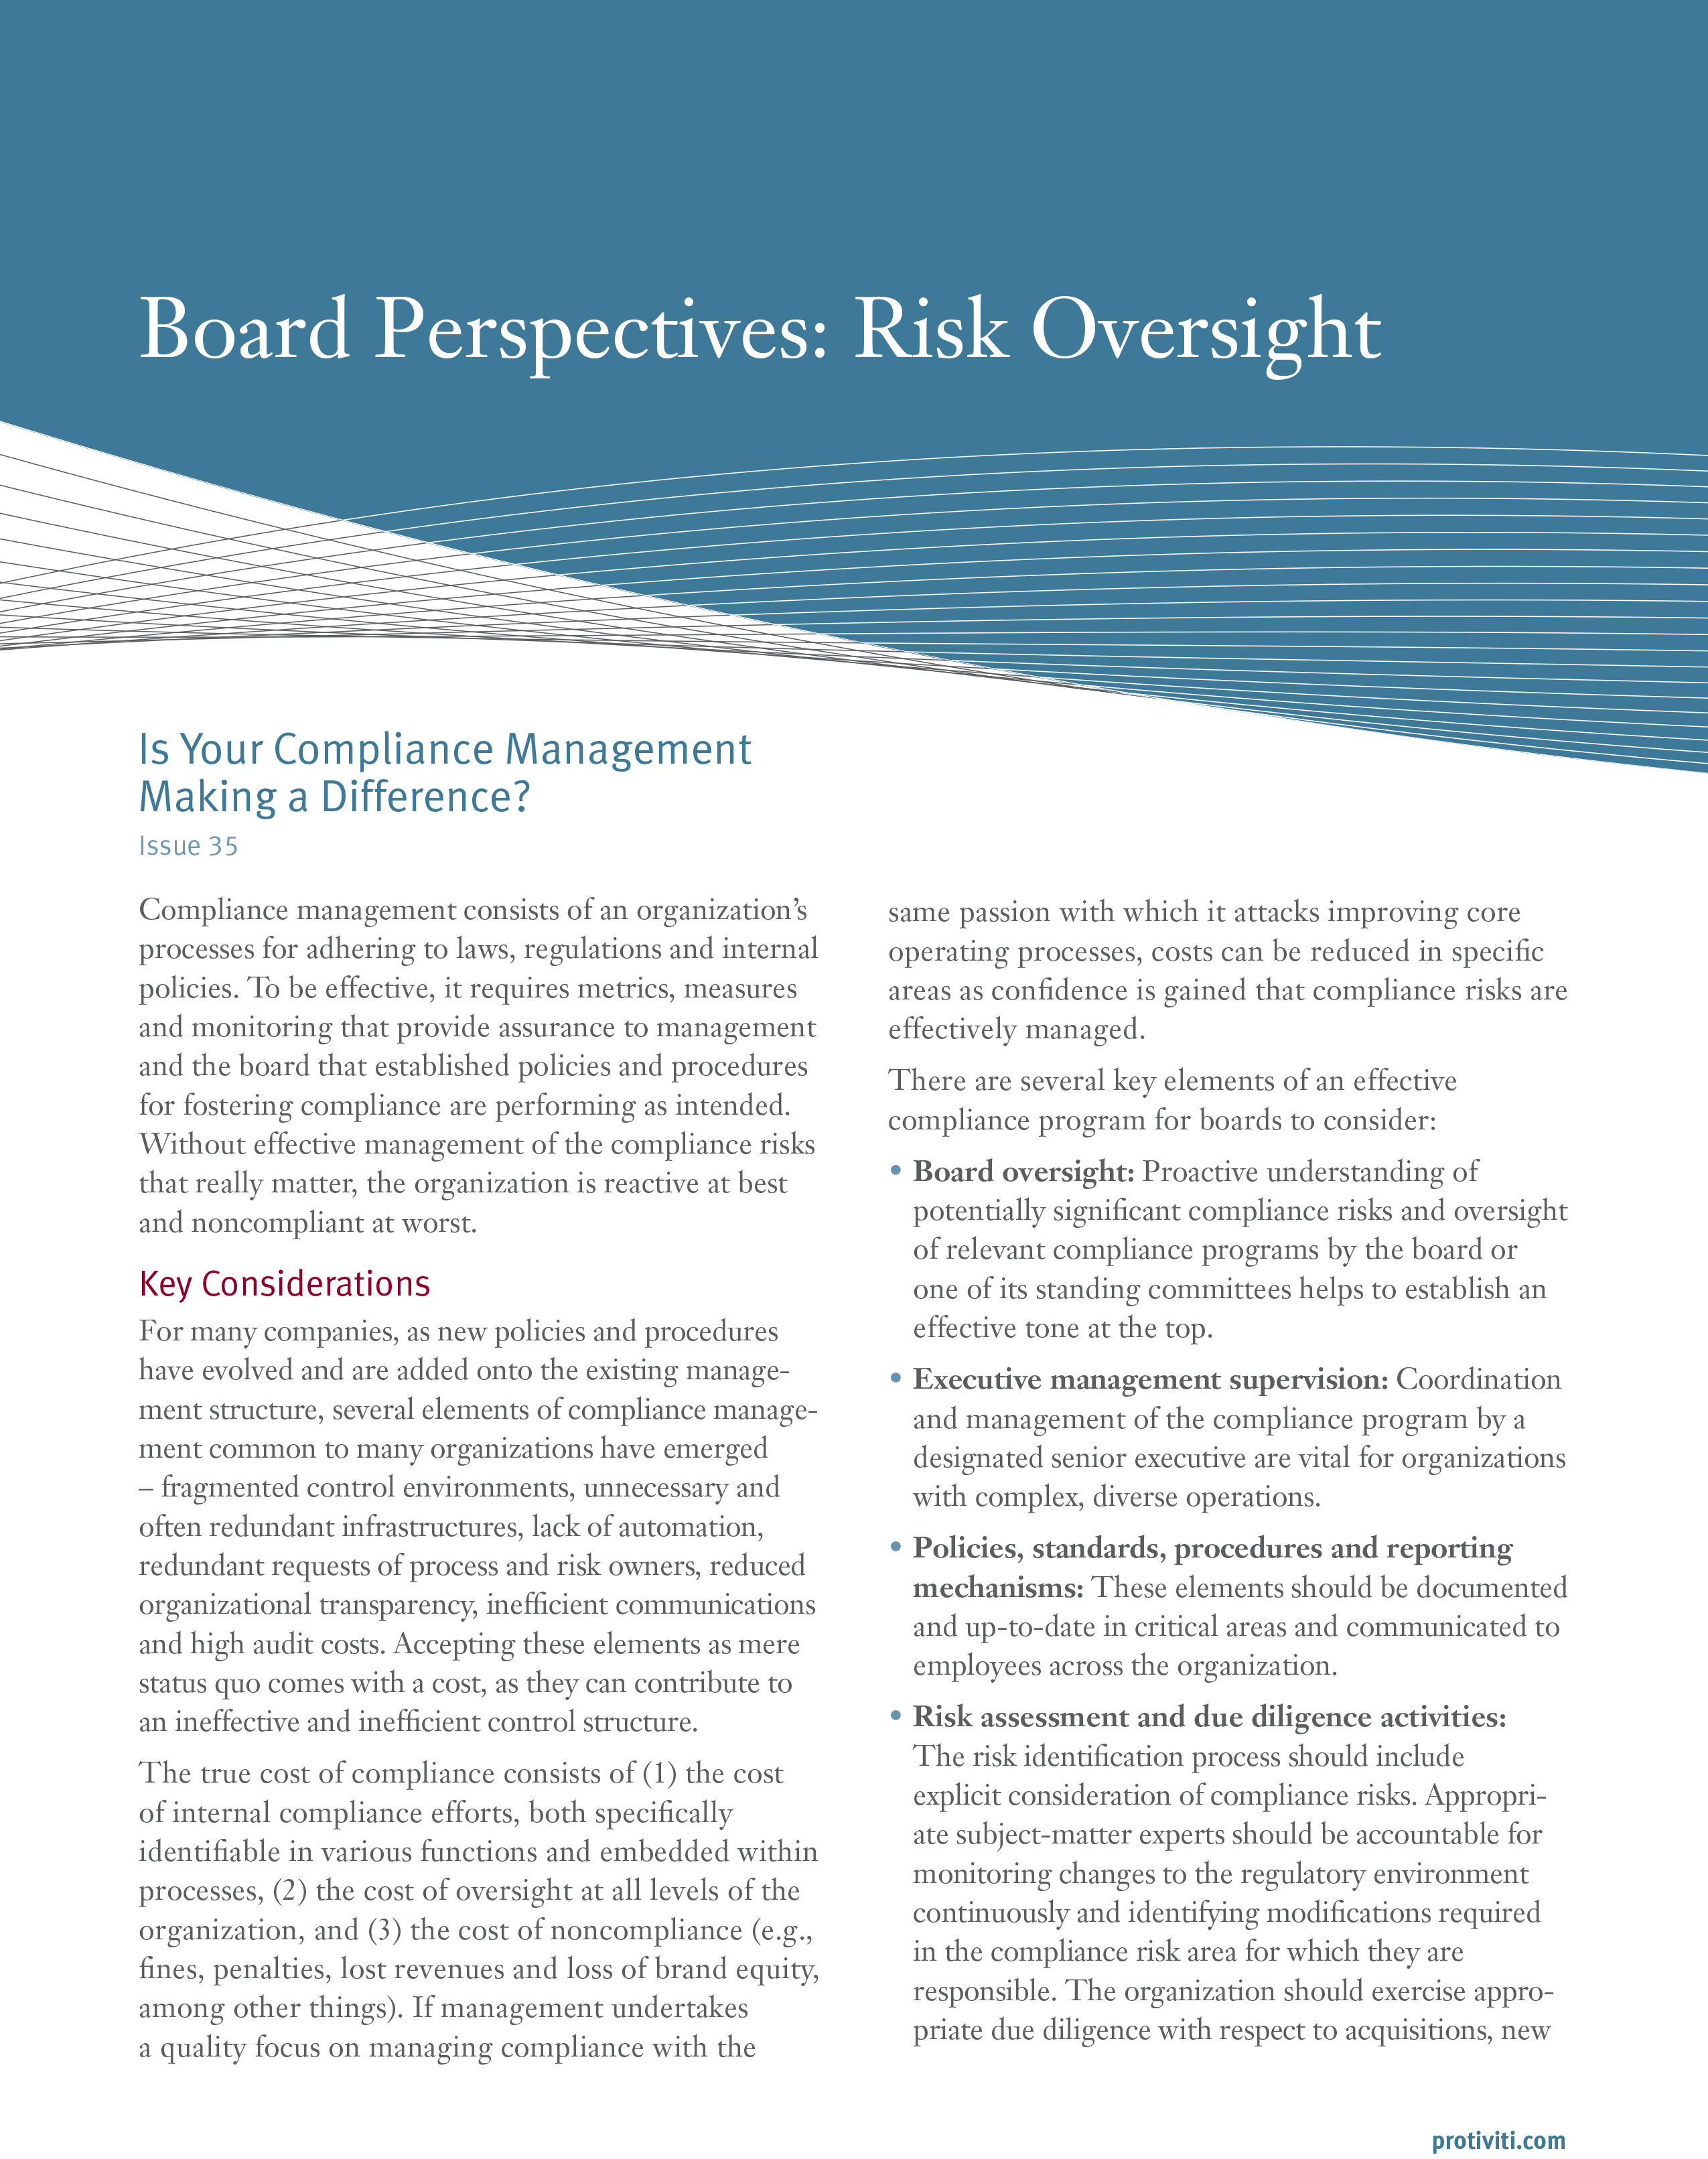 Screenshot of the first page of Is Your Compliance Management Making a Difference-Board Perspectives-Risk Oversight, Issue 35